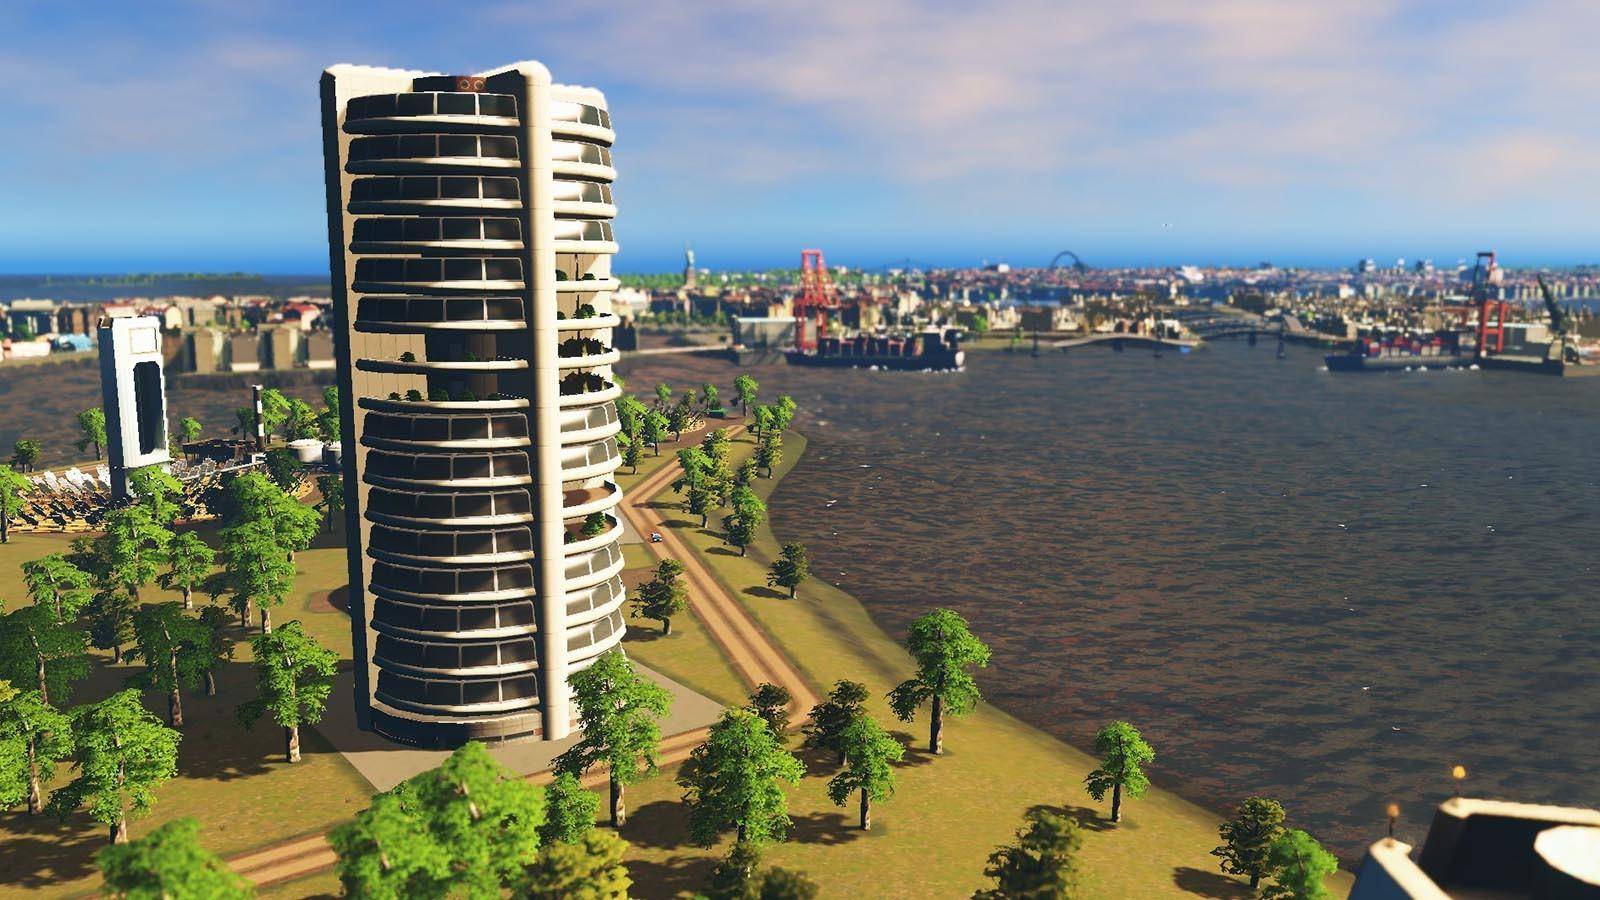 best cities skylines expansion pack